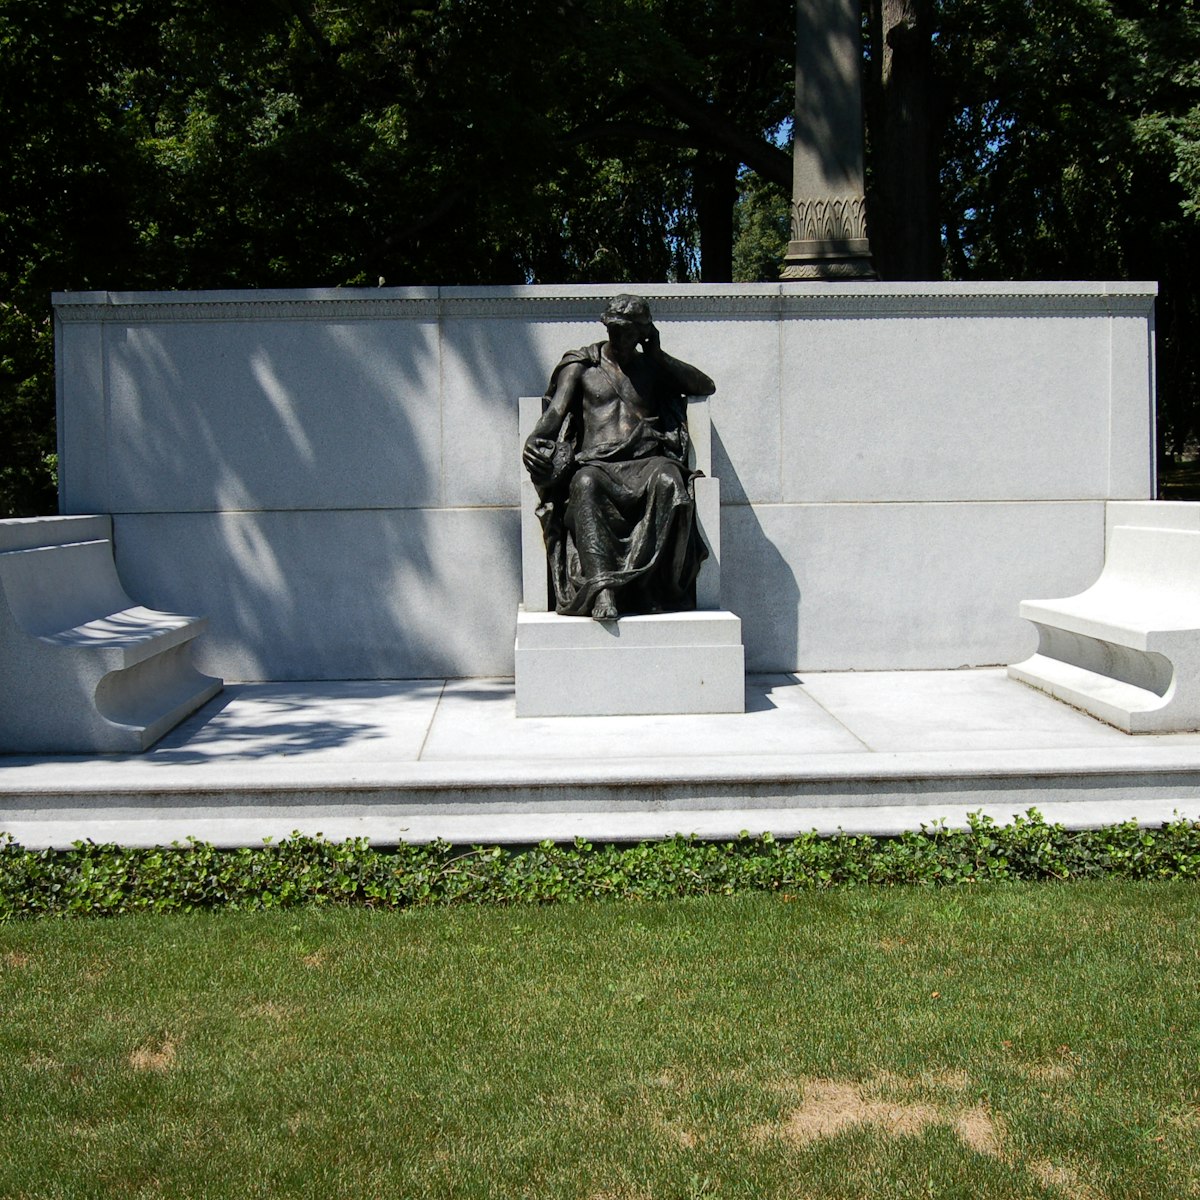 The grave of publisher Joseph Pulitzer in Woodlawn Cemetery in Bronx, NY.